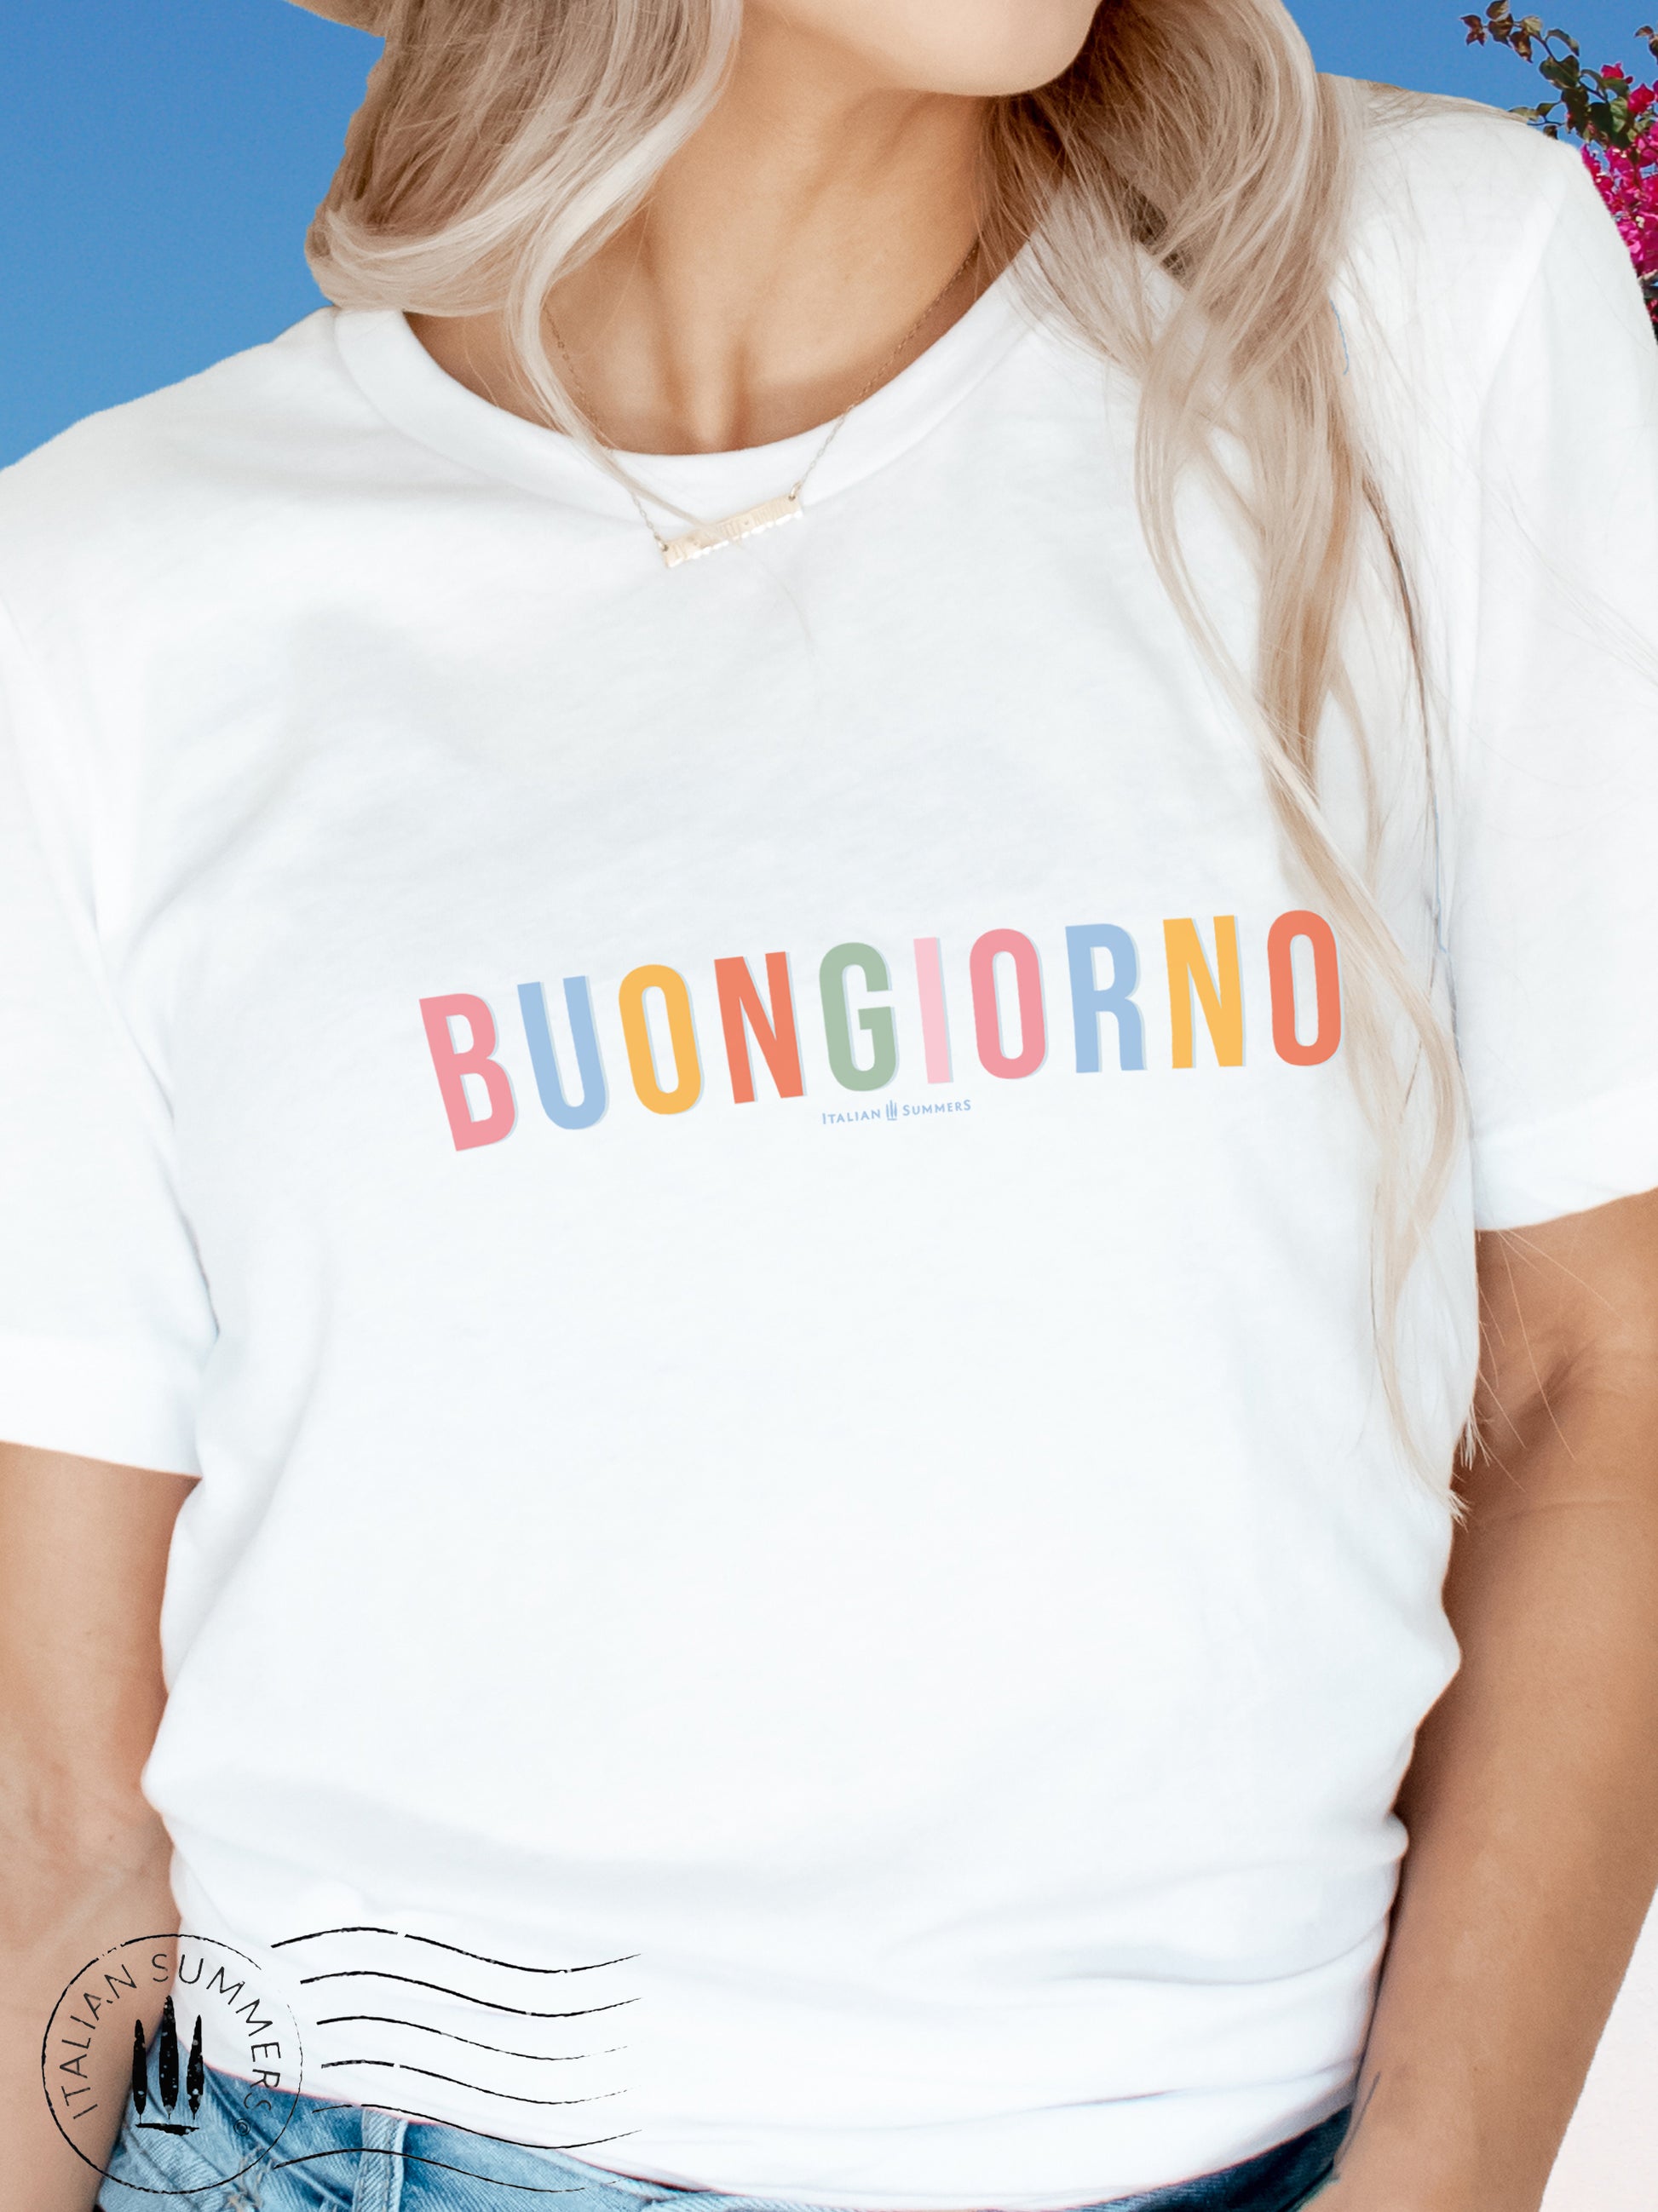 Itay inspired  white cotton T shirt with the Italian phrase " Buongiorno" printed in different soft pastel colors for each letter. A  subtle but stylish way to both wink at all Italy-lovers and to give a nice positive greeting to whomever reads it.